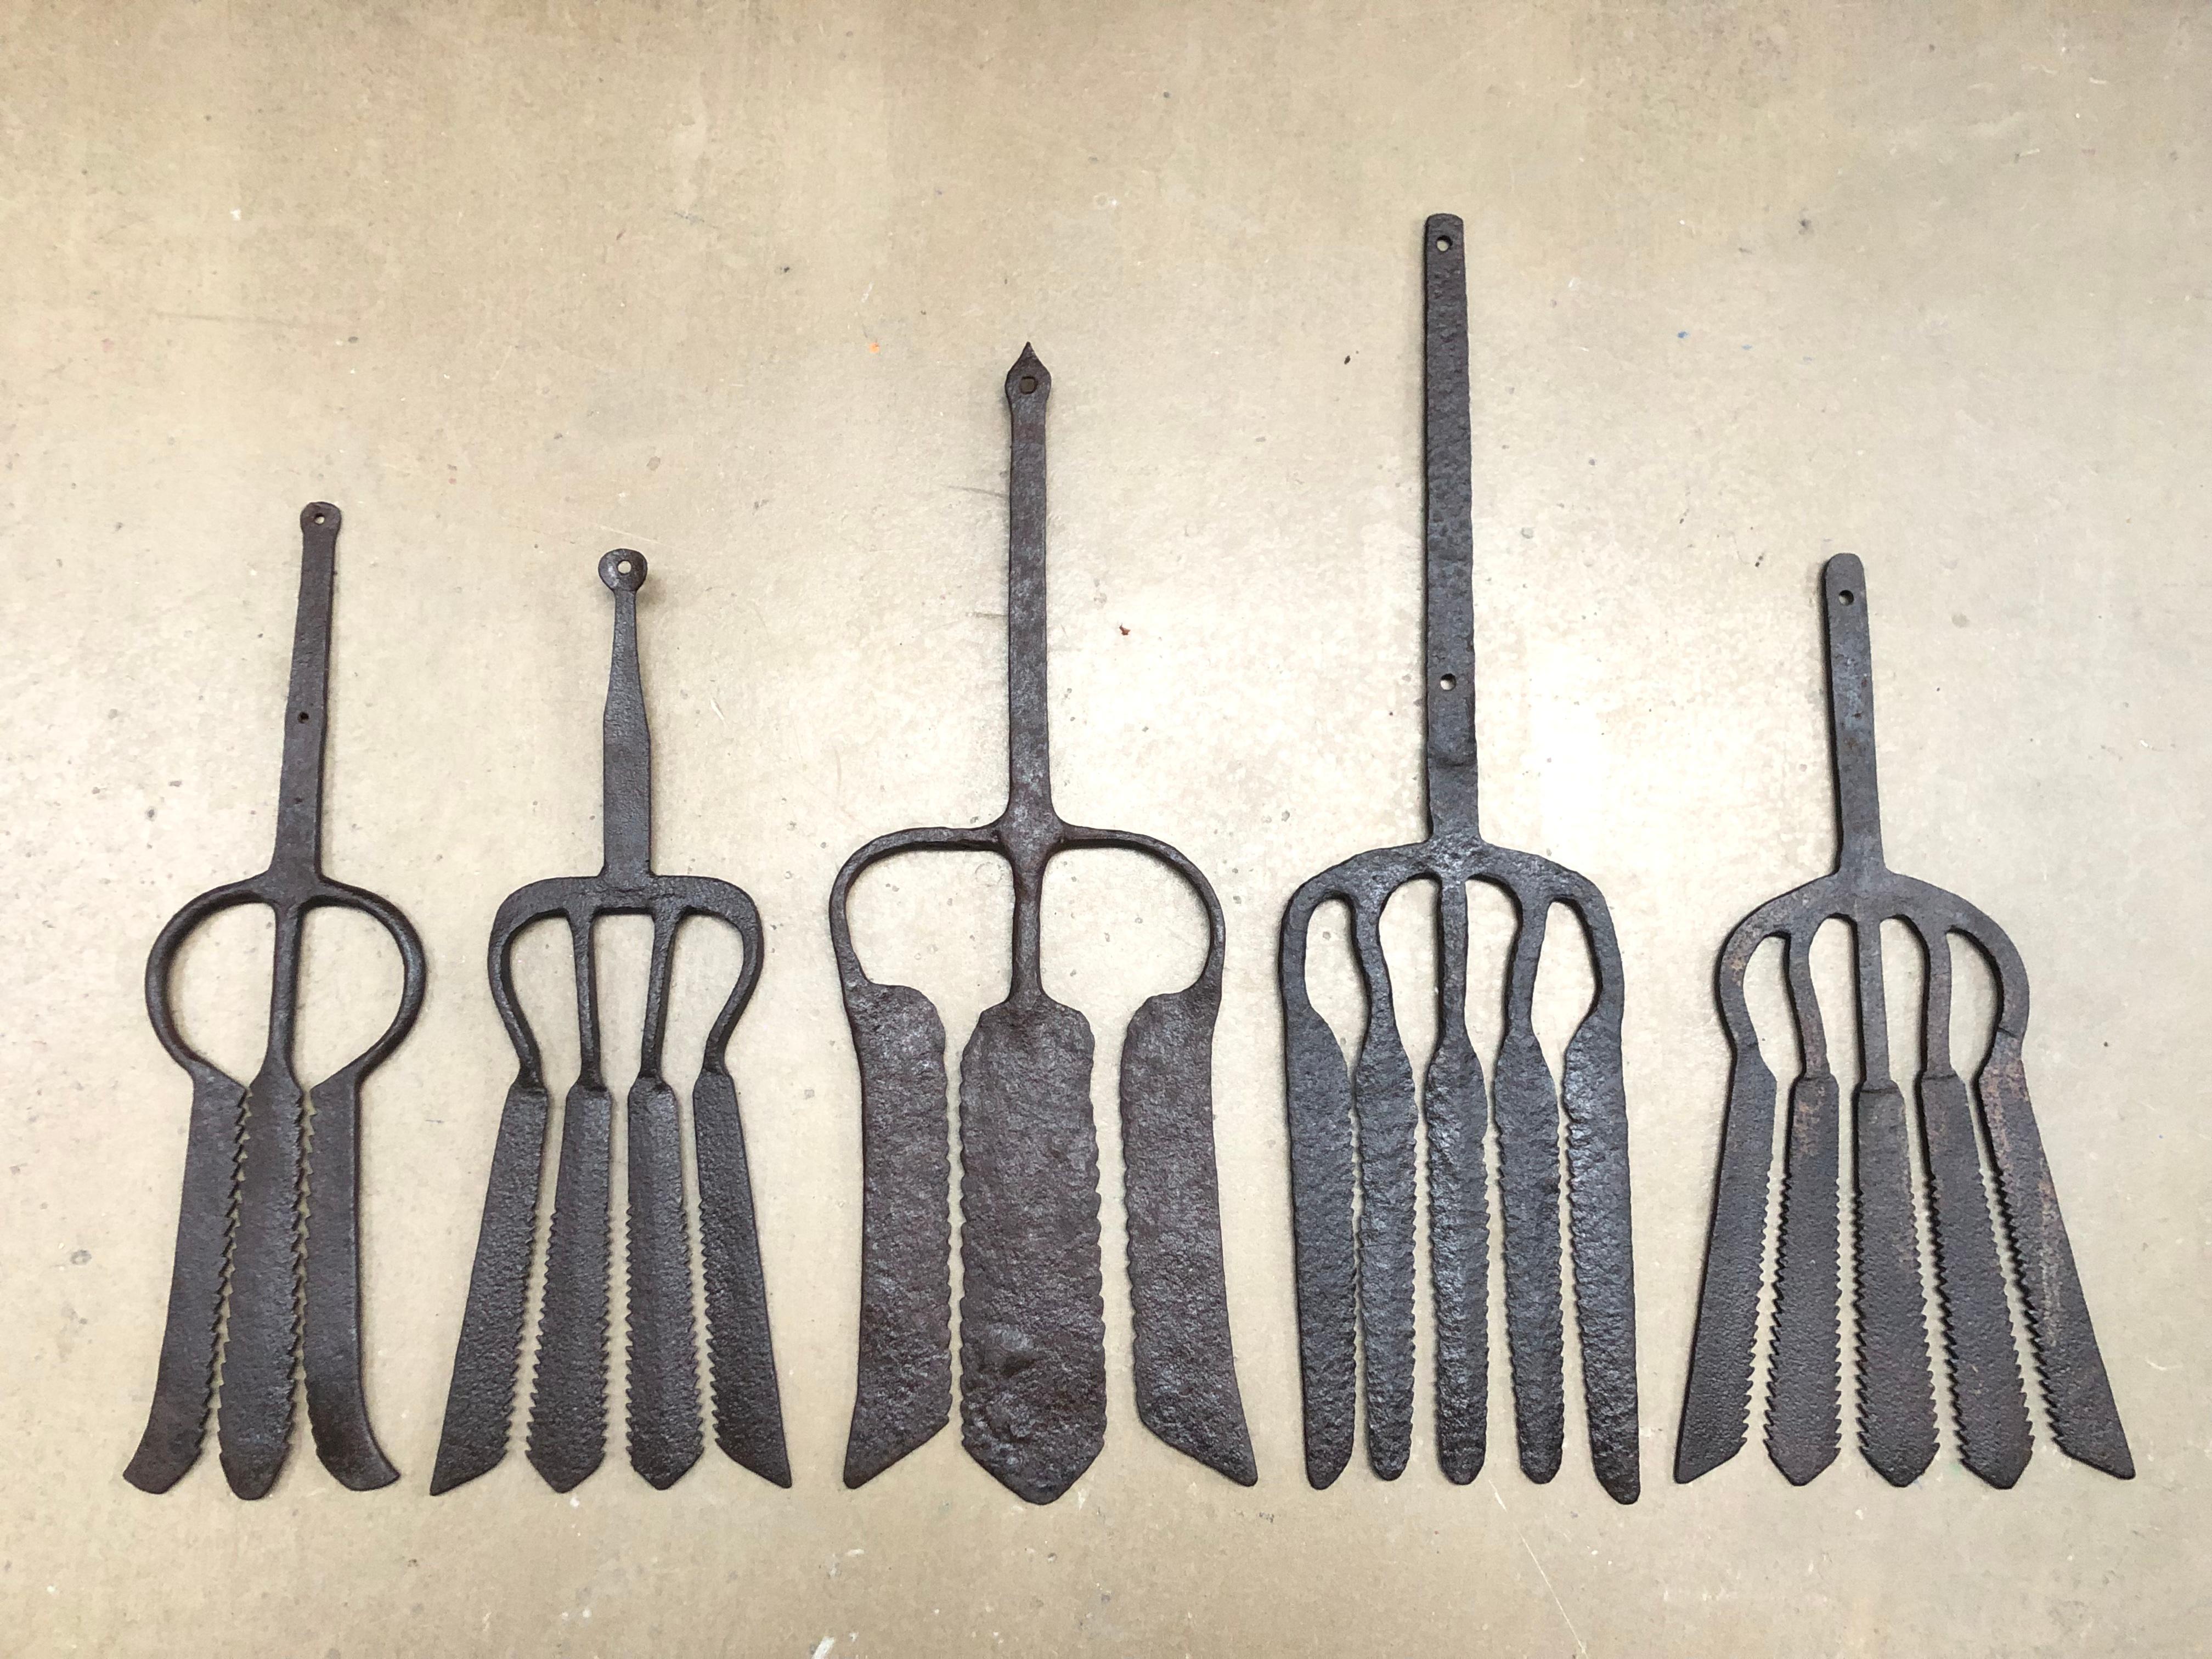 A collection of 5 wrought iron eel forks from the 18th century. 
Extremely decorative and each one unique. 
Each one is a work of art. 
Sizes vary from 41 cm to 58 cm. 
Would look amazing in a fish restaurant, bar, club or even in your home.
In